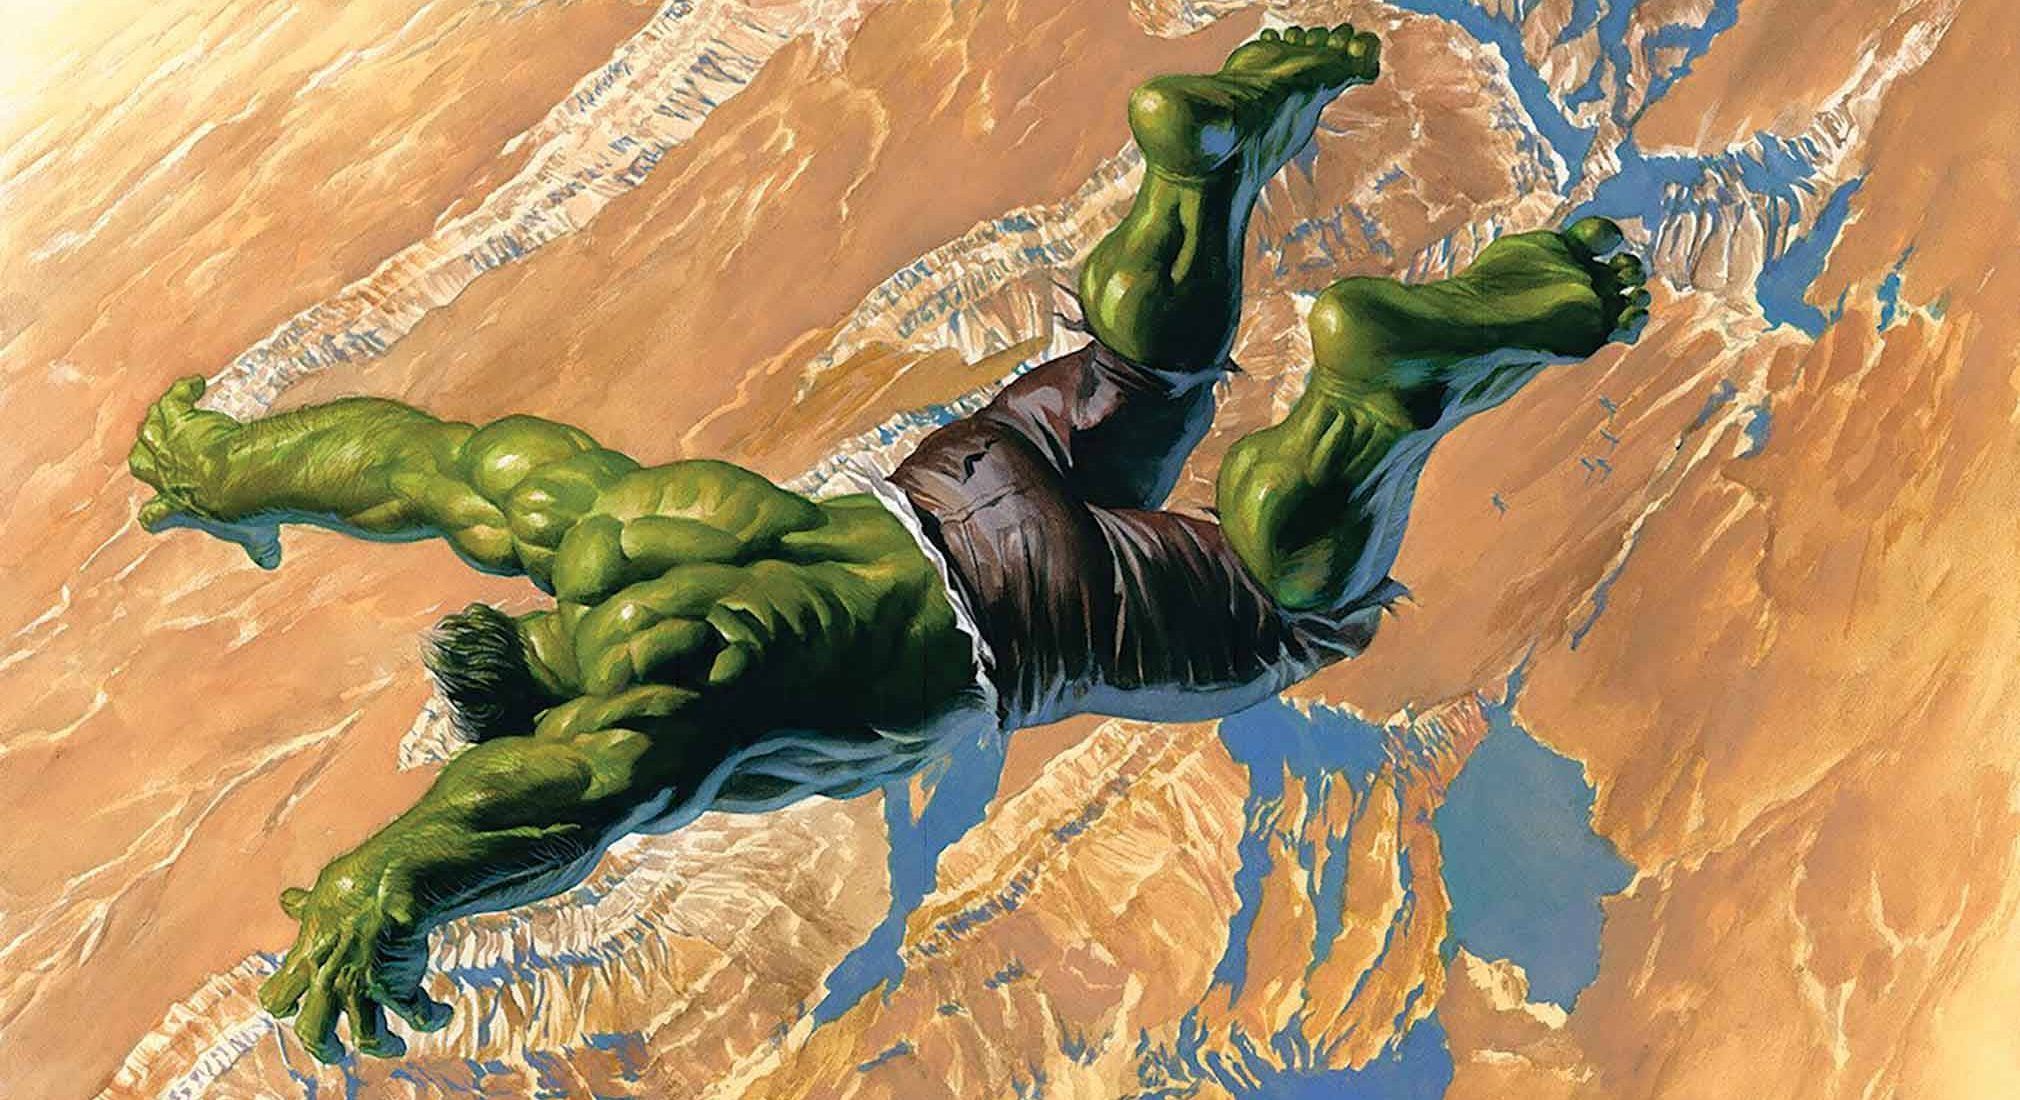 Marvel Comics Universe & Immortal Hulk Spoilers: This Issue Changes EVERYTHING For Marvel's Gamma Powered Heroes & Villains! (Legacy )